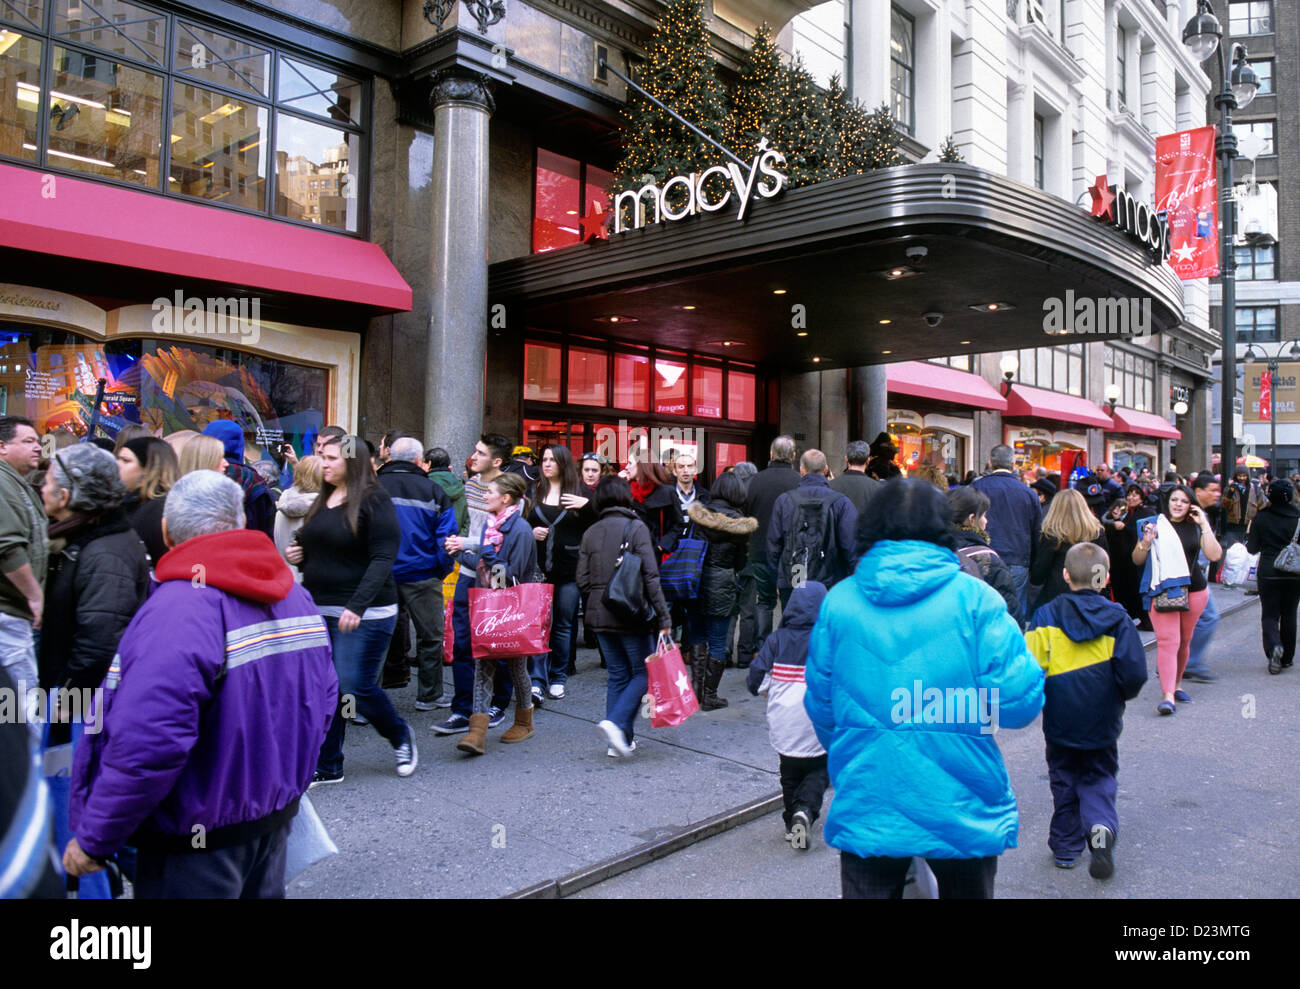 New York City Macy's department store building≥ Crowds gather on the street to view storefront Christmas holiday windows. New York, USA Stock Photo